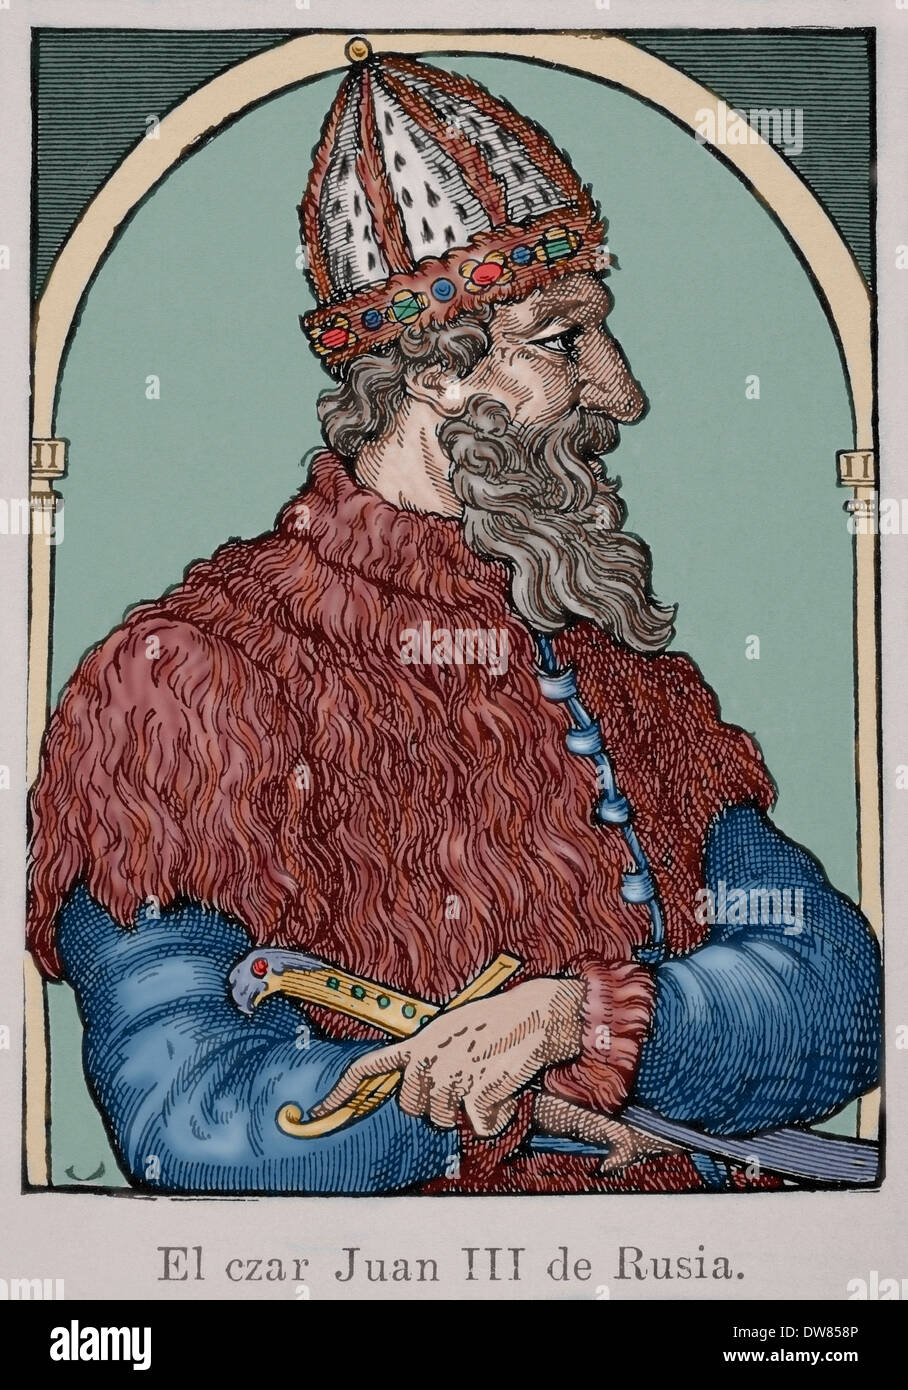 Ivan III of Russia (1440-1505). Grand Prince of Moscow. Engraving of an unknown author. Colored. Stock Photo